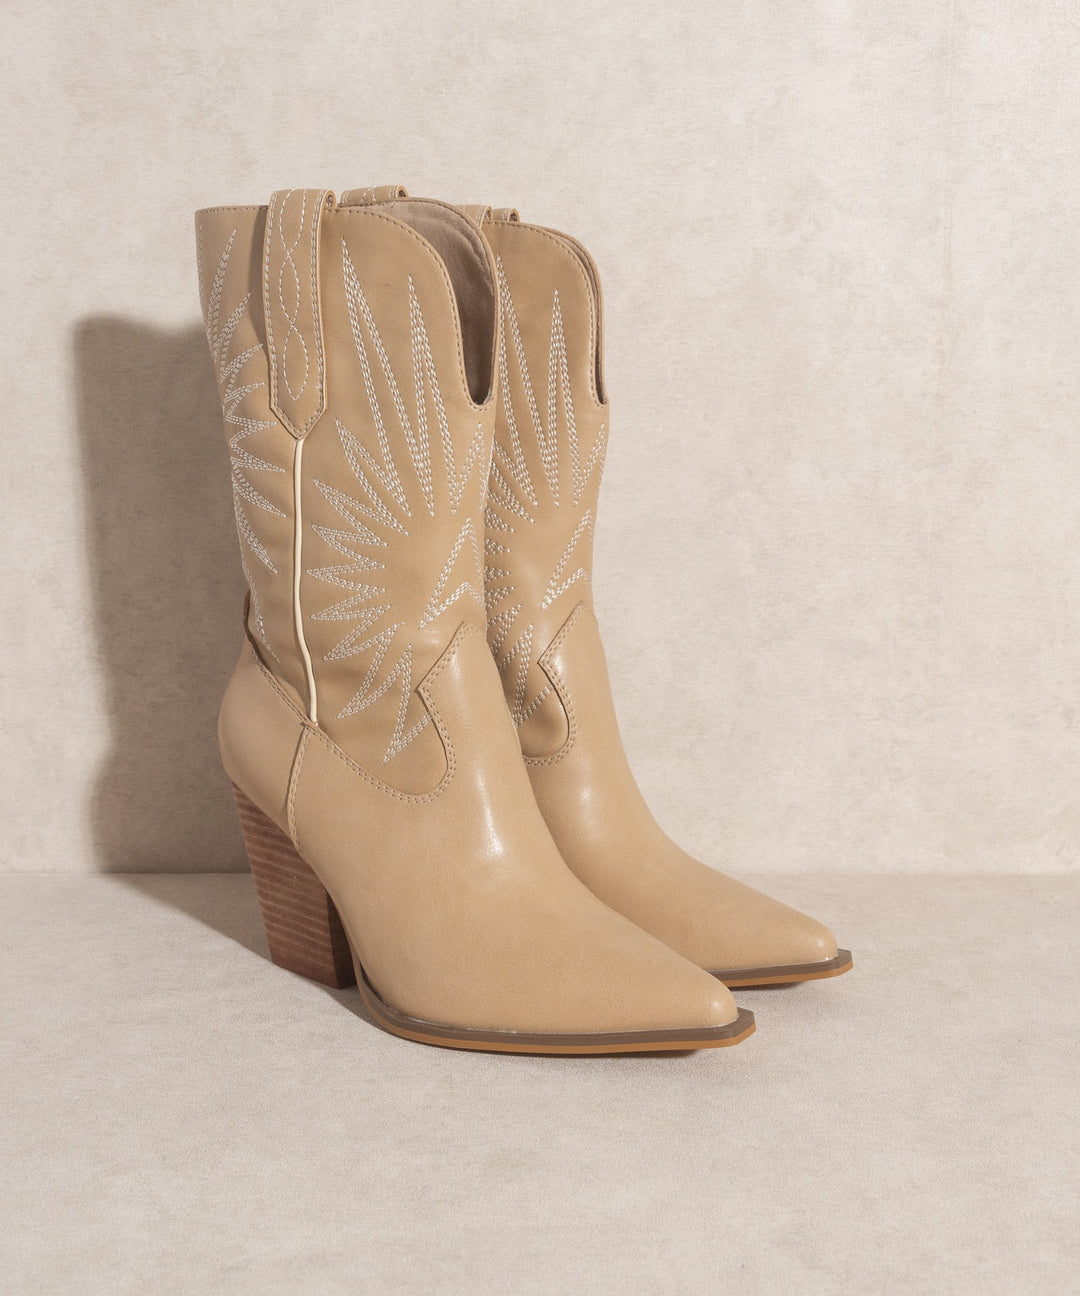 Emersyn Starburst Embroidery Boot